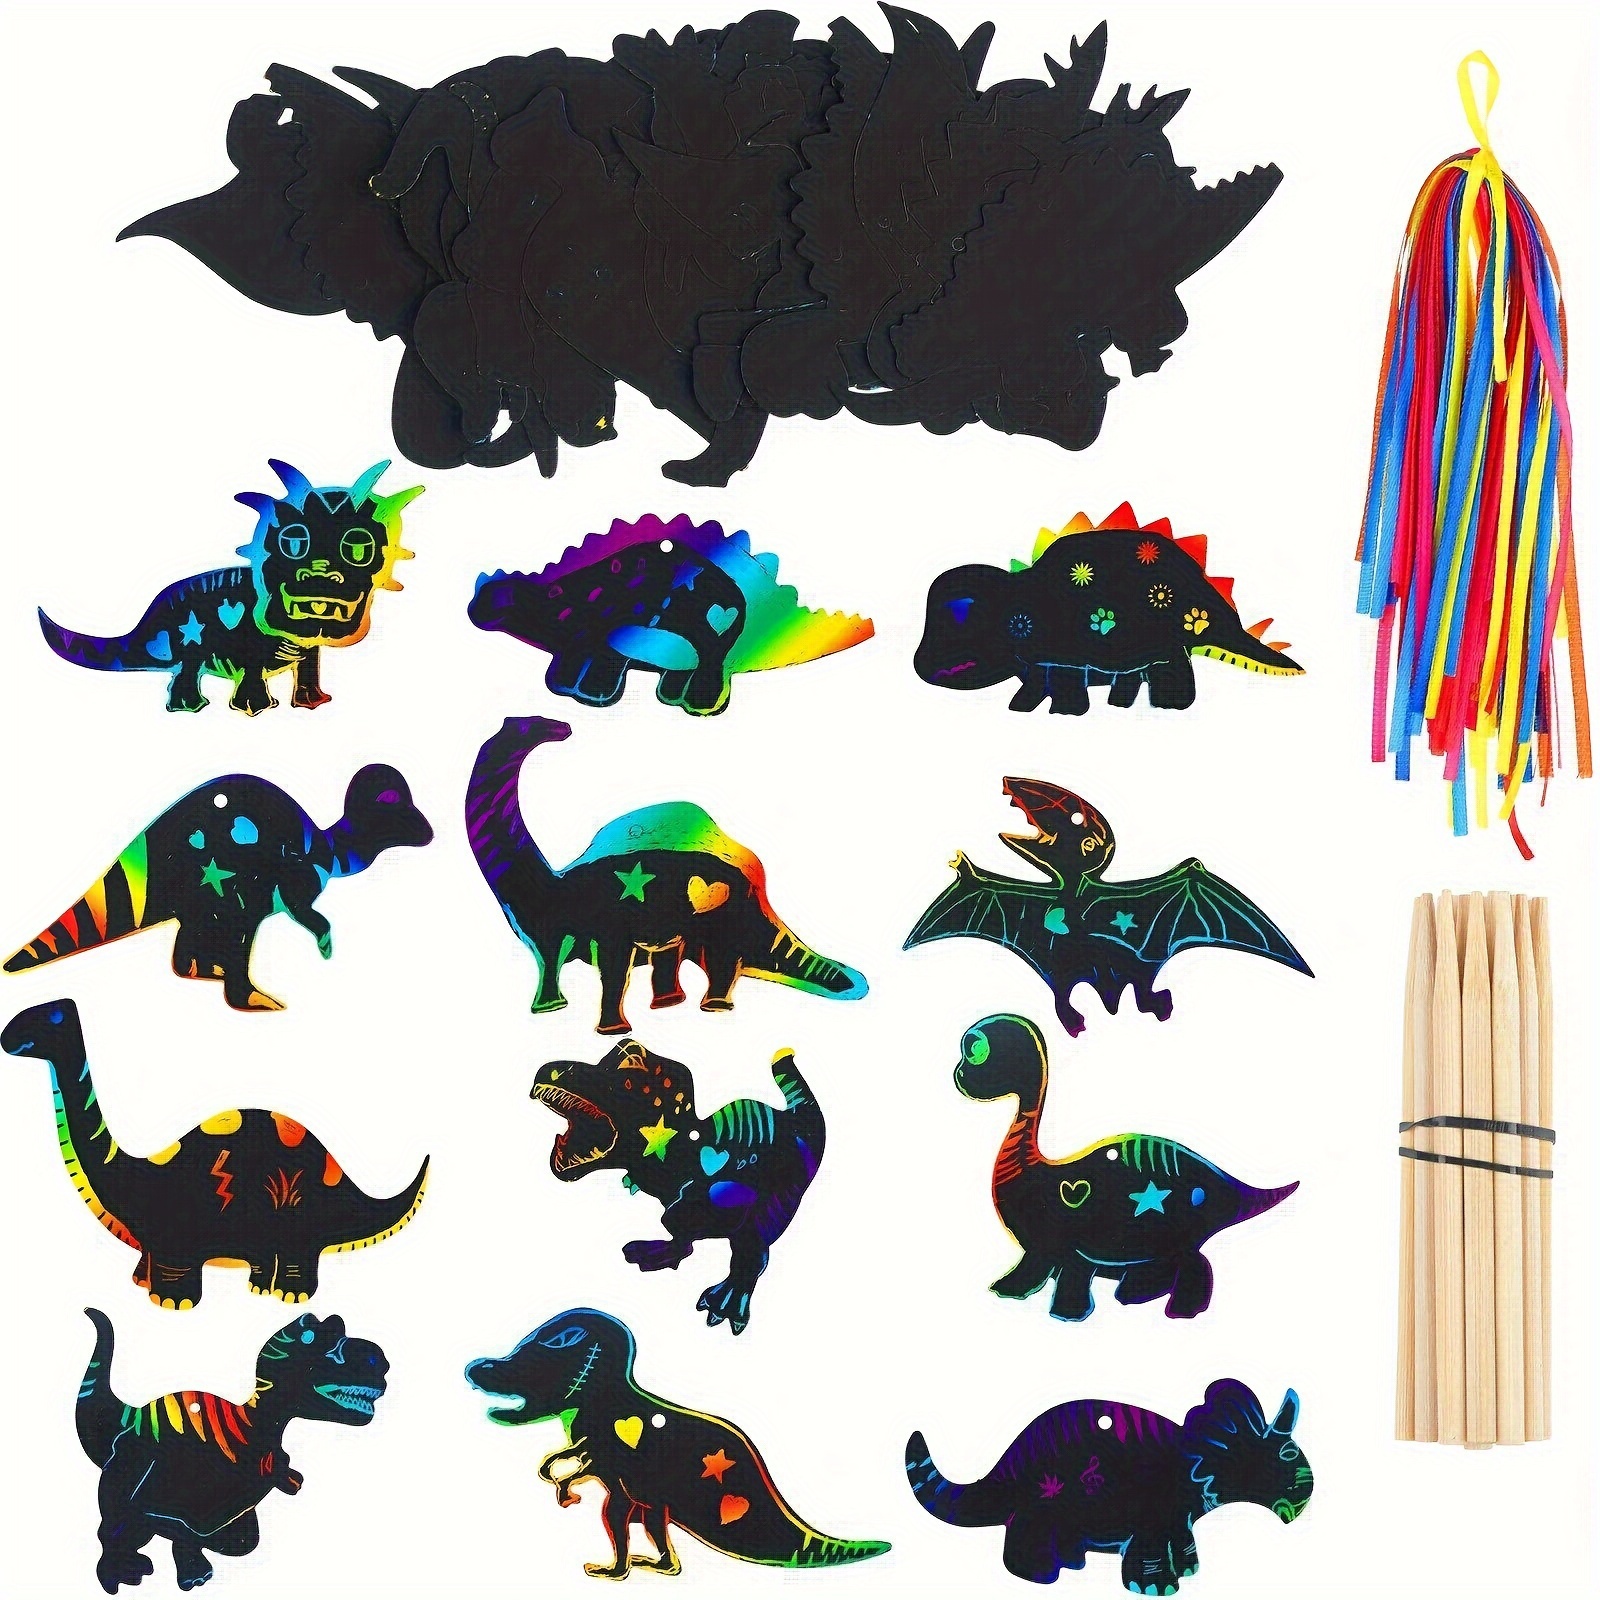 

24pcs Dinosaur Diy Rainbow Scratch Paper, Colorful Graffiti, Reative Decoration, Birthday Gift, Funny Games, For Birthday Party Holiday Gift, Contains Bamboo Pen